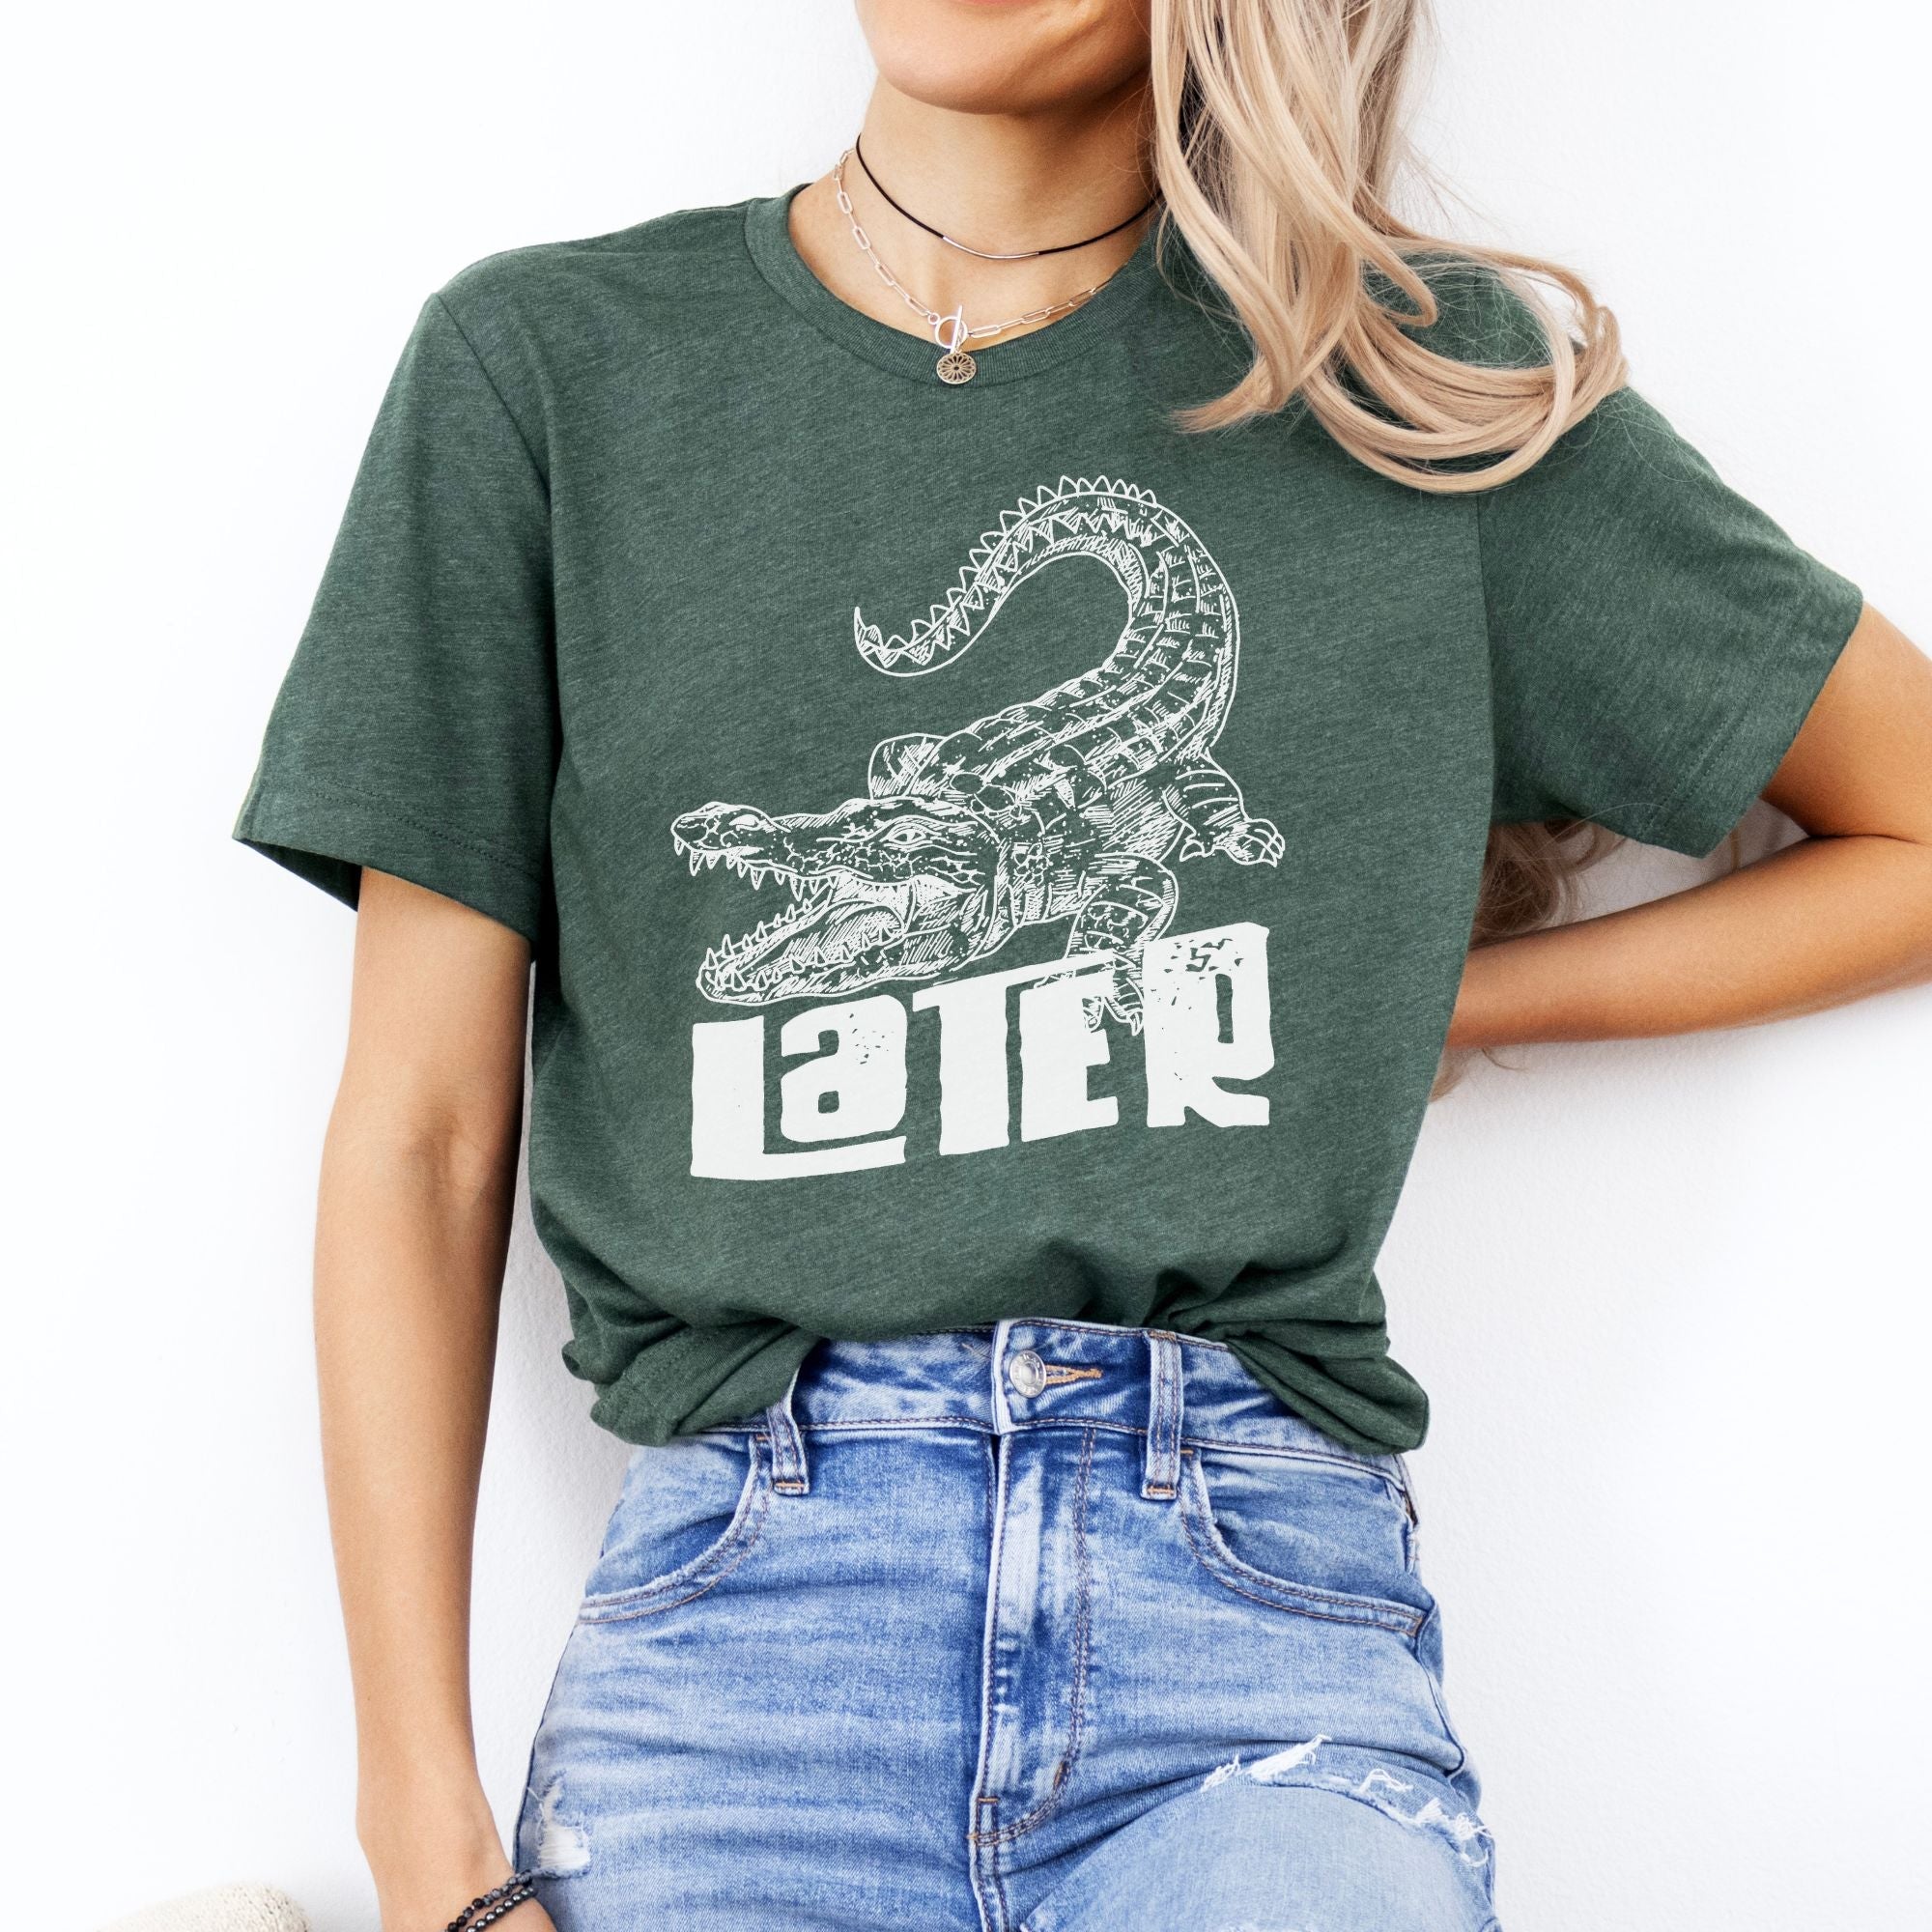 Later Gator Funny Graphic Tee *UNISEX FIT*-Graphic Tees-208 Tees Wholesale, Idaho